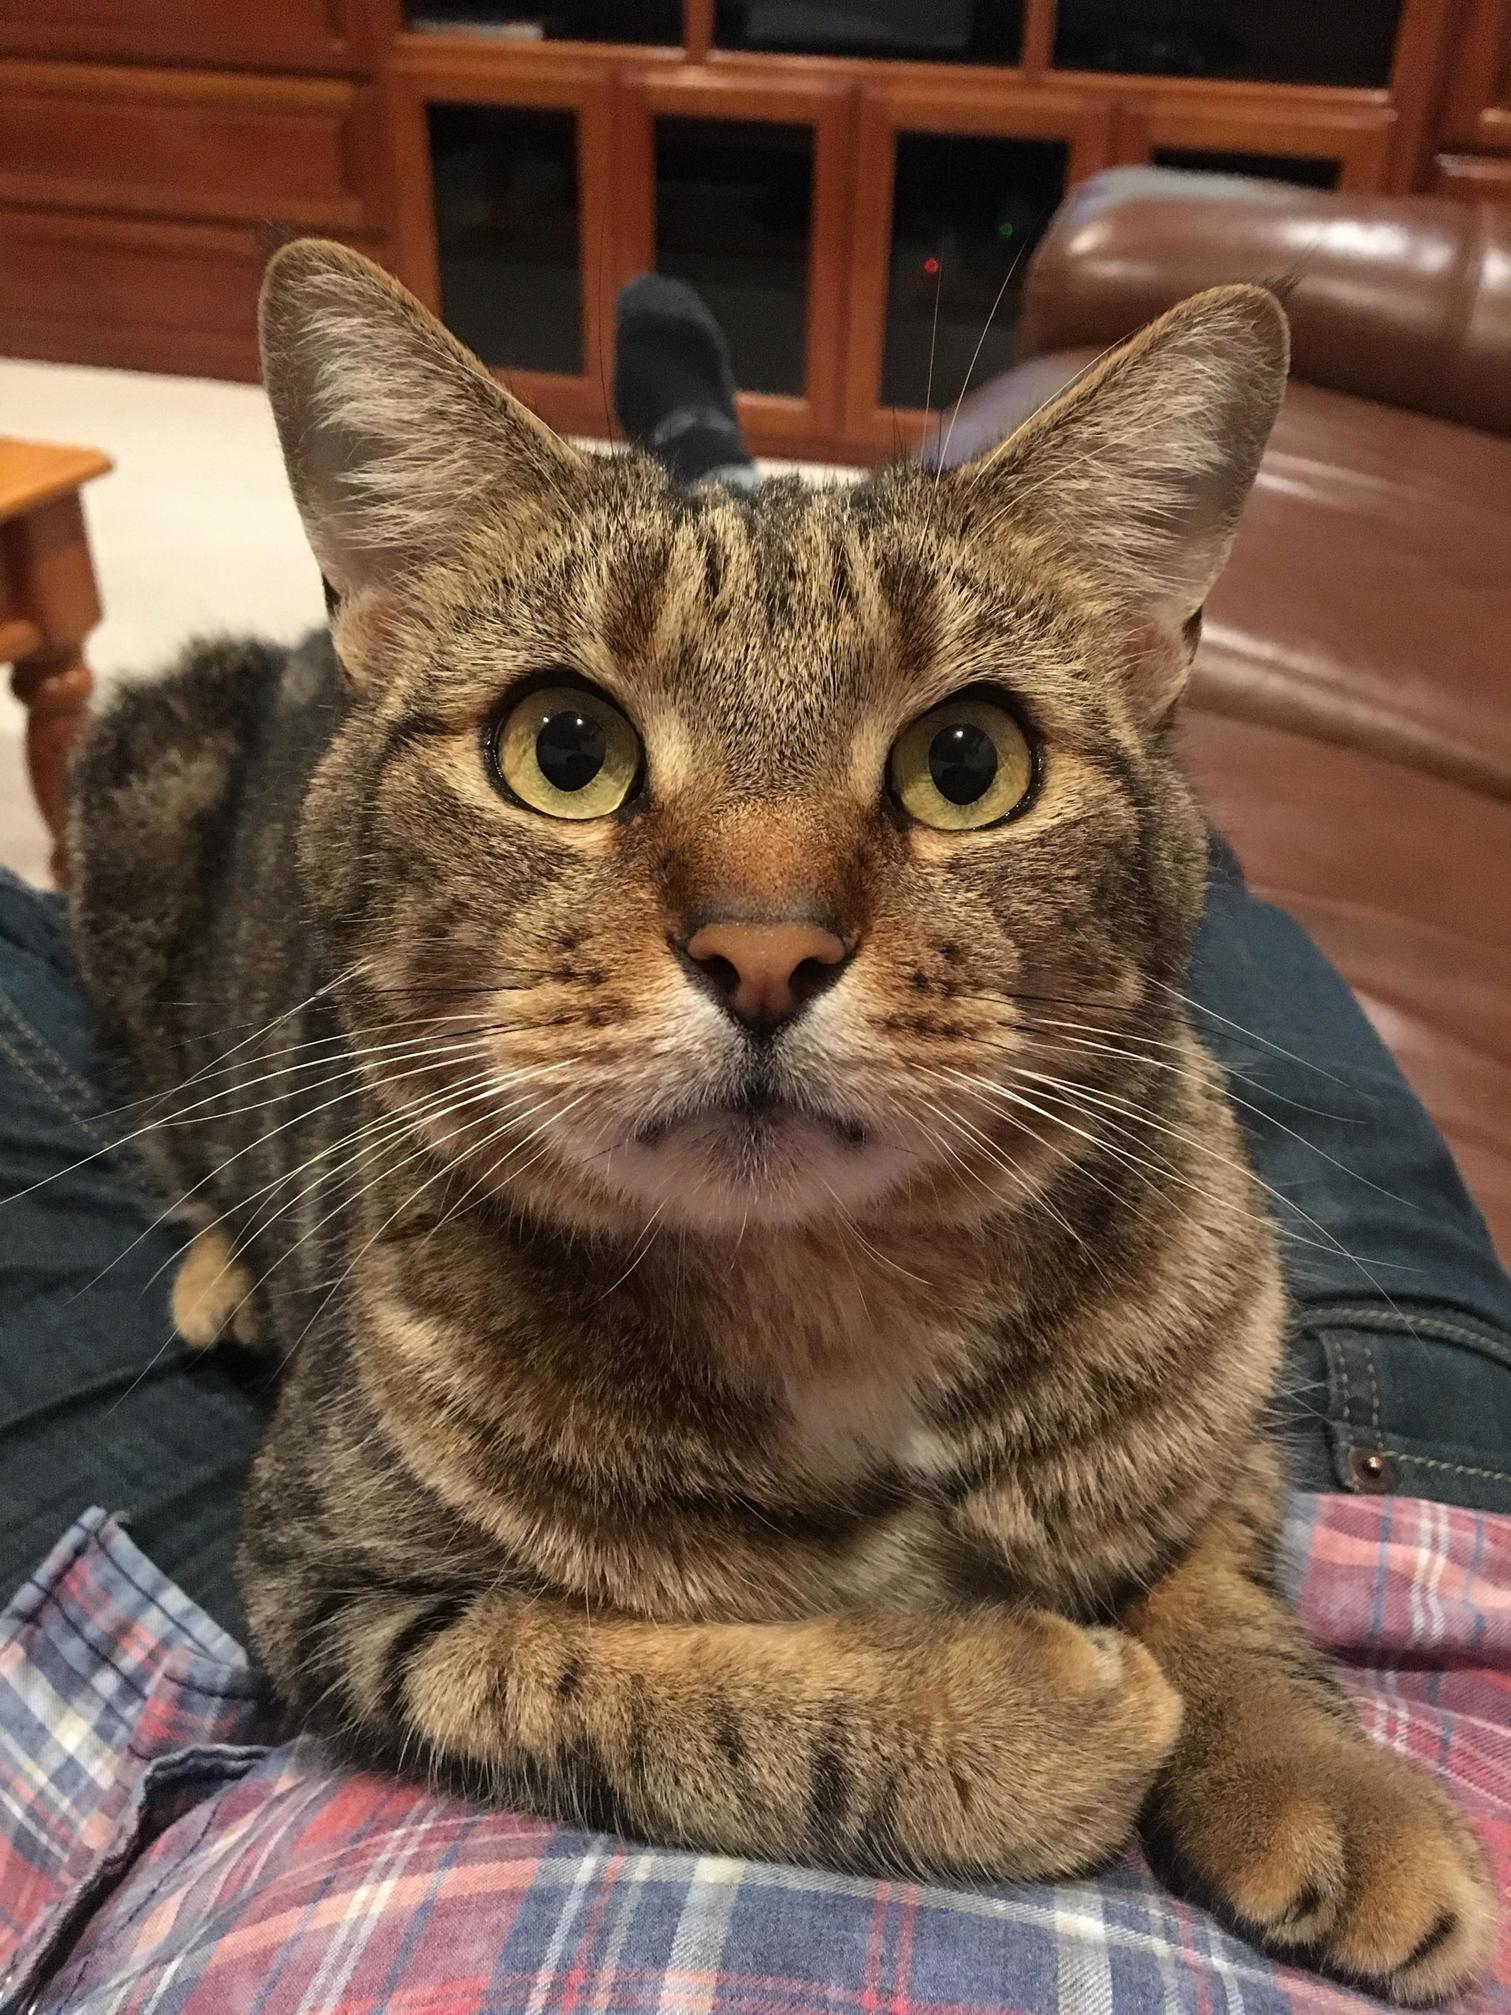 This is gilbert and he likes to sit in laps.